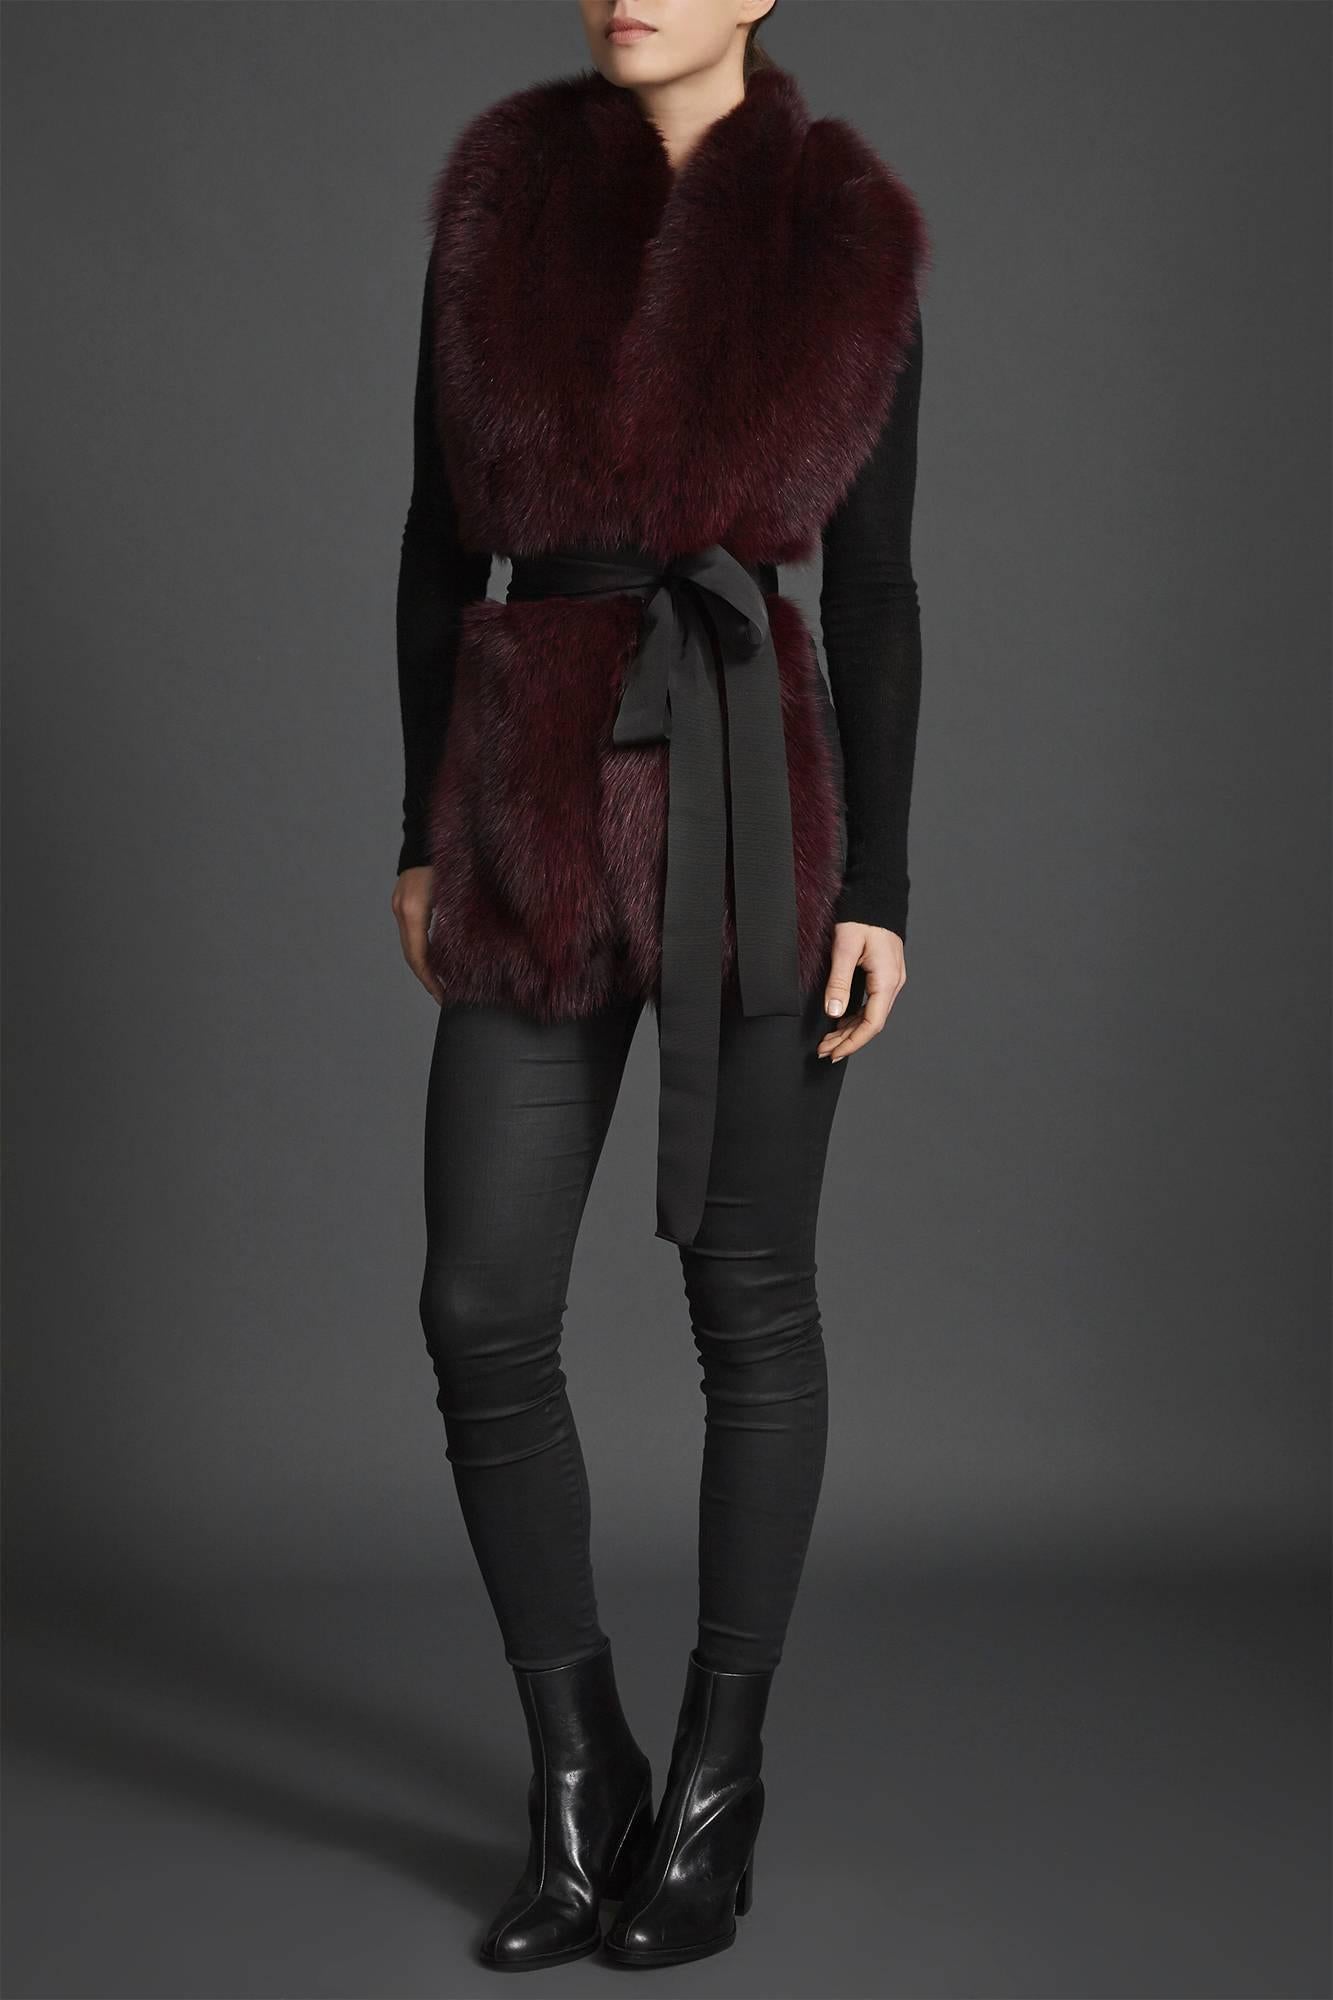 Verheyen London Legacy Stole in Garnet Burgundy Fox Fur with Belt 

The Legacy Stole is Verheyen London’s versatile design to be worn from day to night. Crafted in the finest dyed fox fur and lined in coloured silk satin.  A structured design to